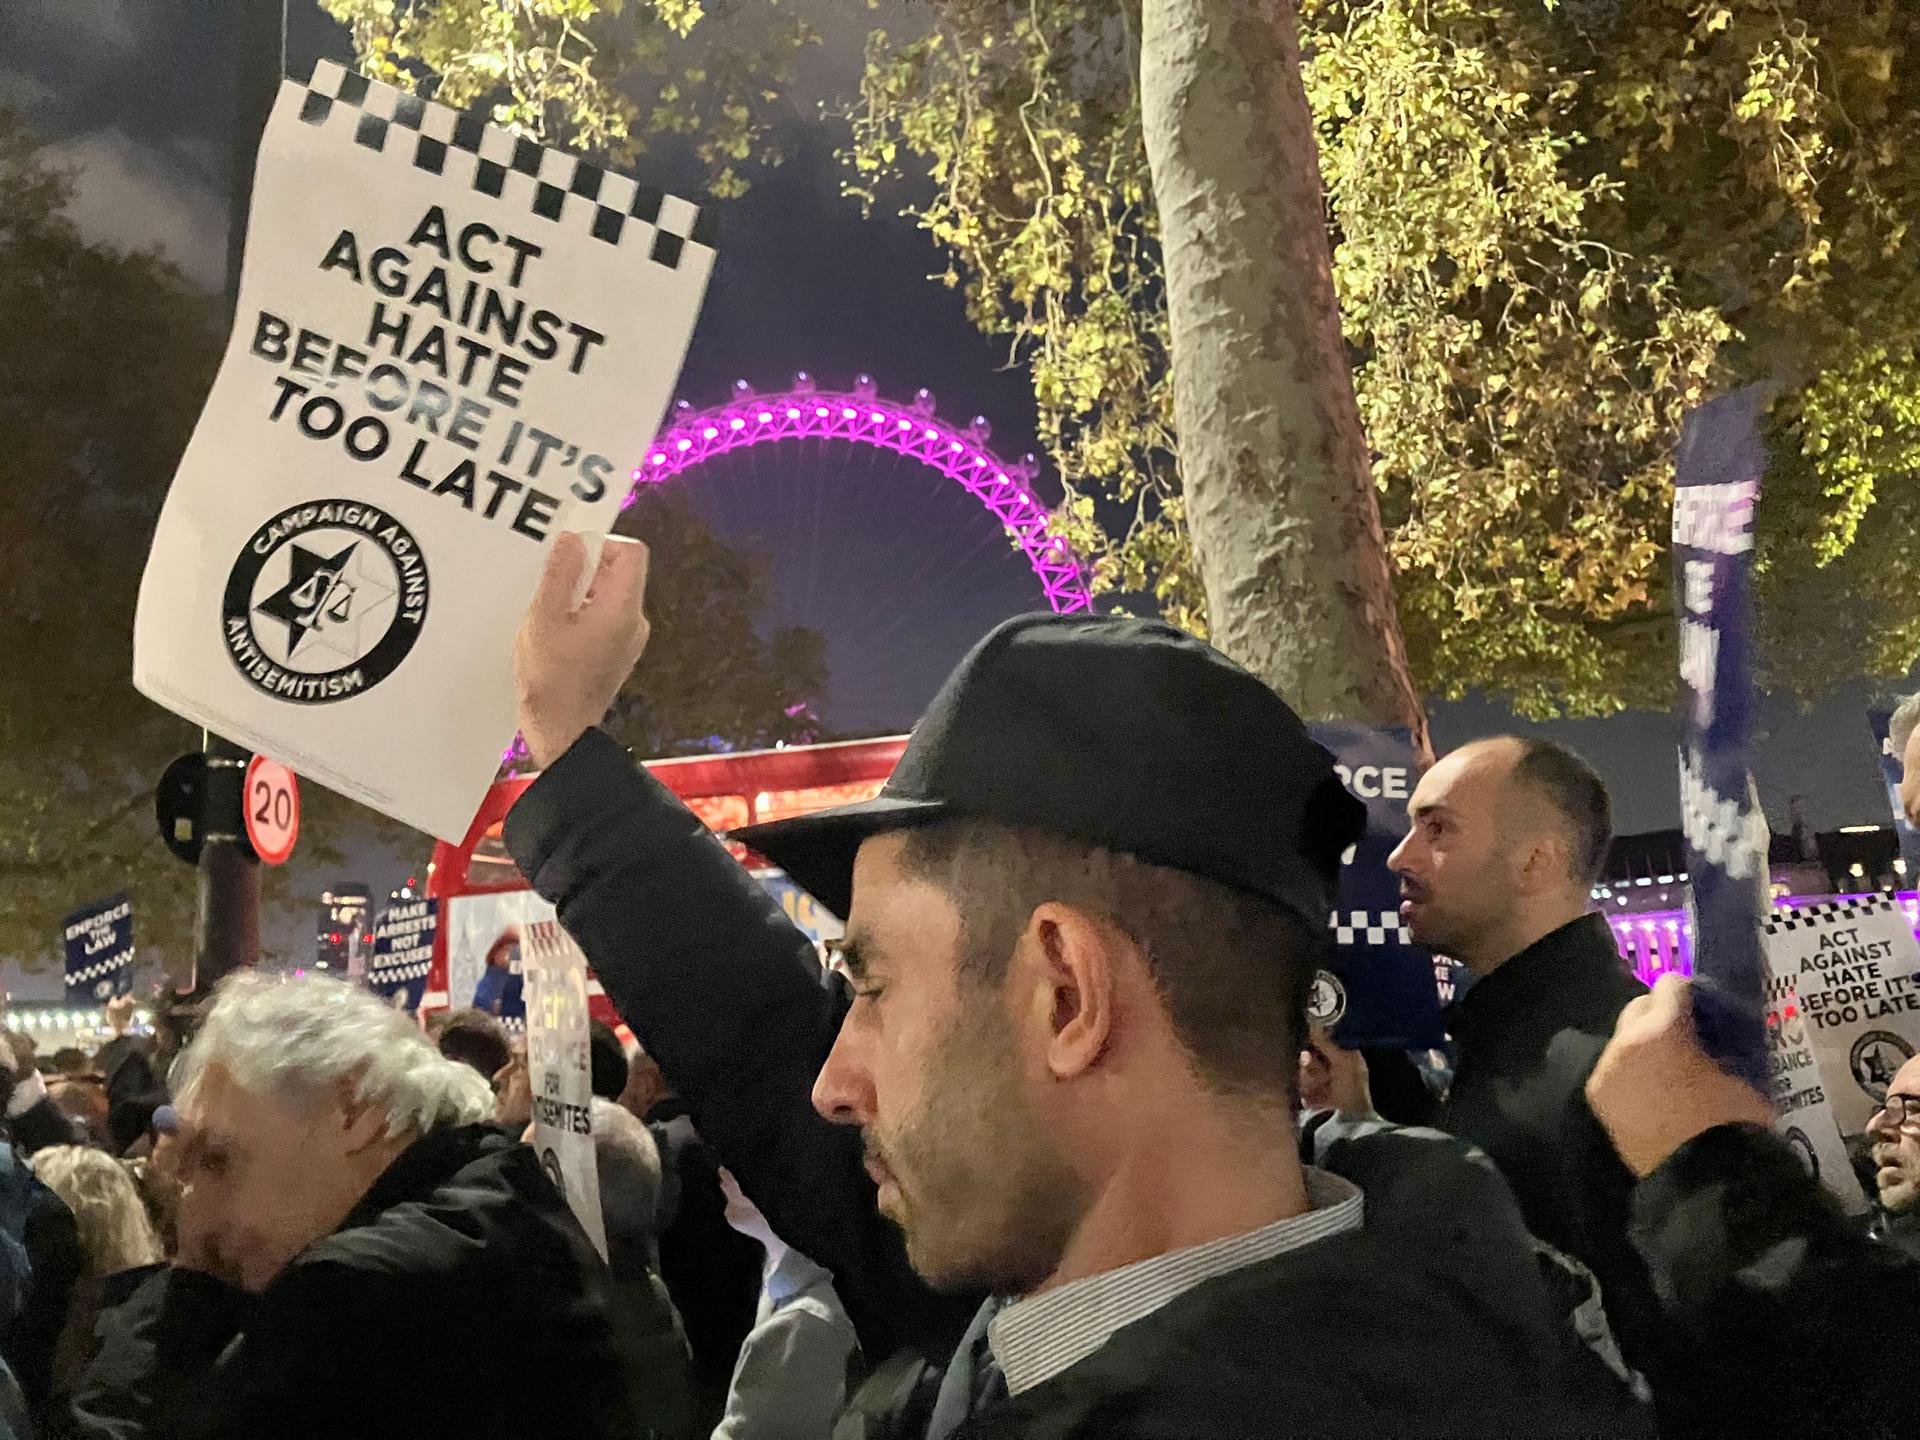 Hundreds gather at a rally outside New Scotland Yard demanding police to do more to protect London's Jewish citizens.